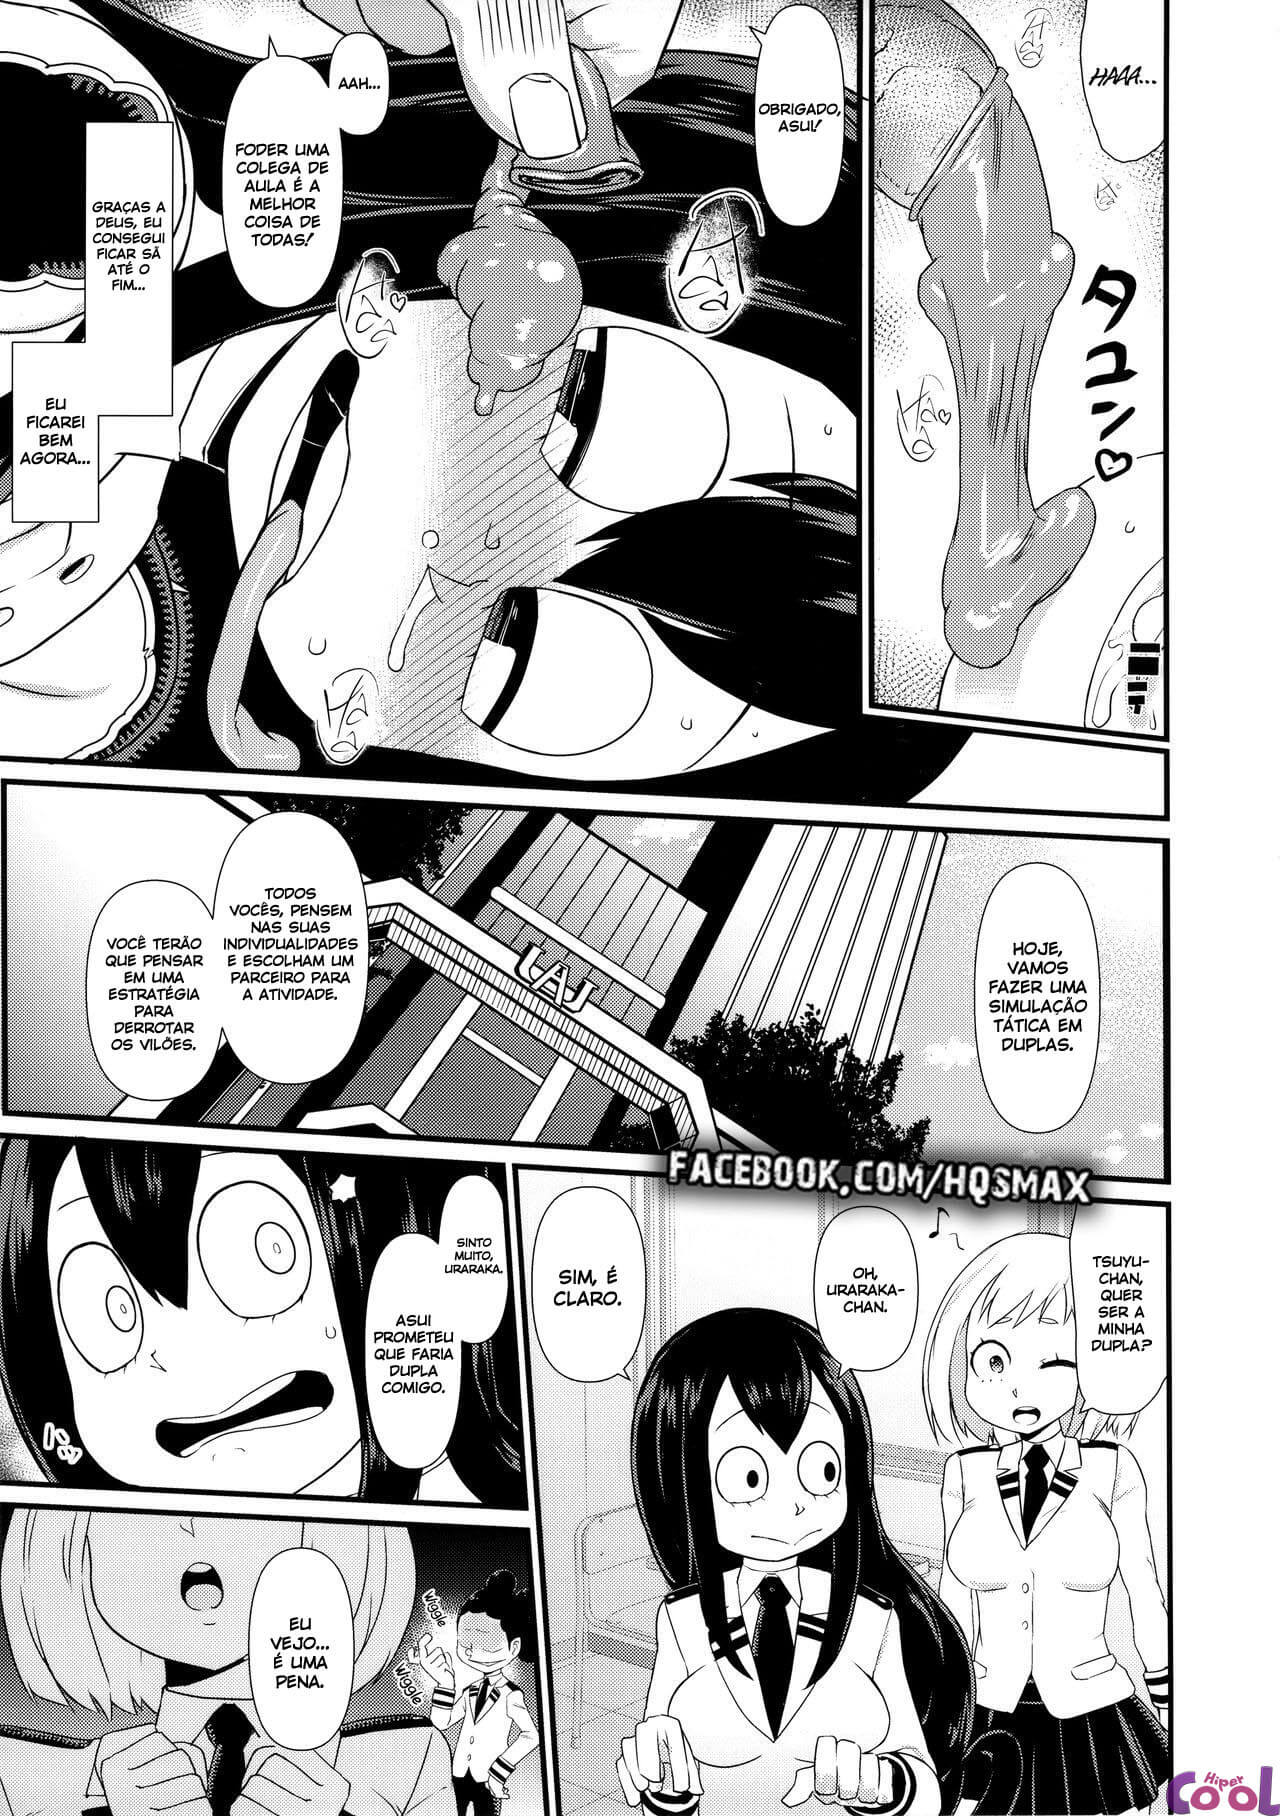 froppy-chapter-01-page-19.jpg